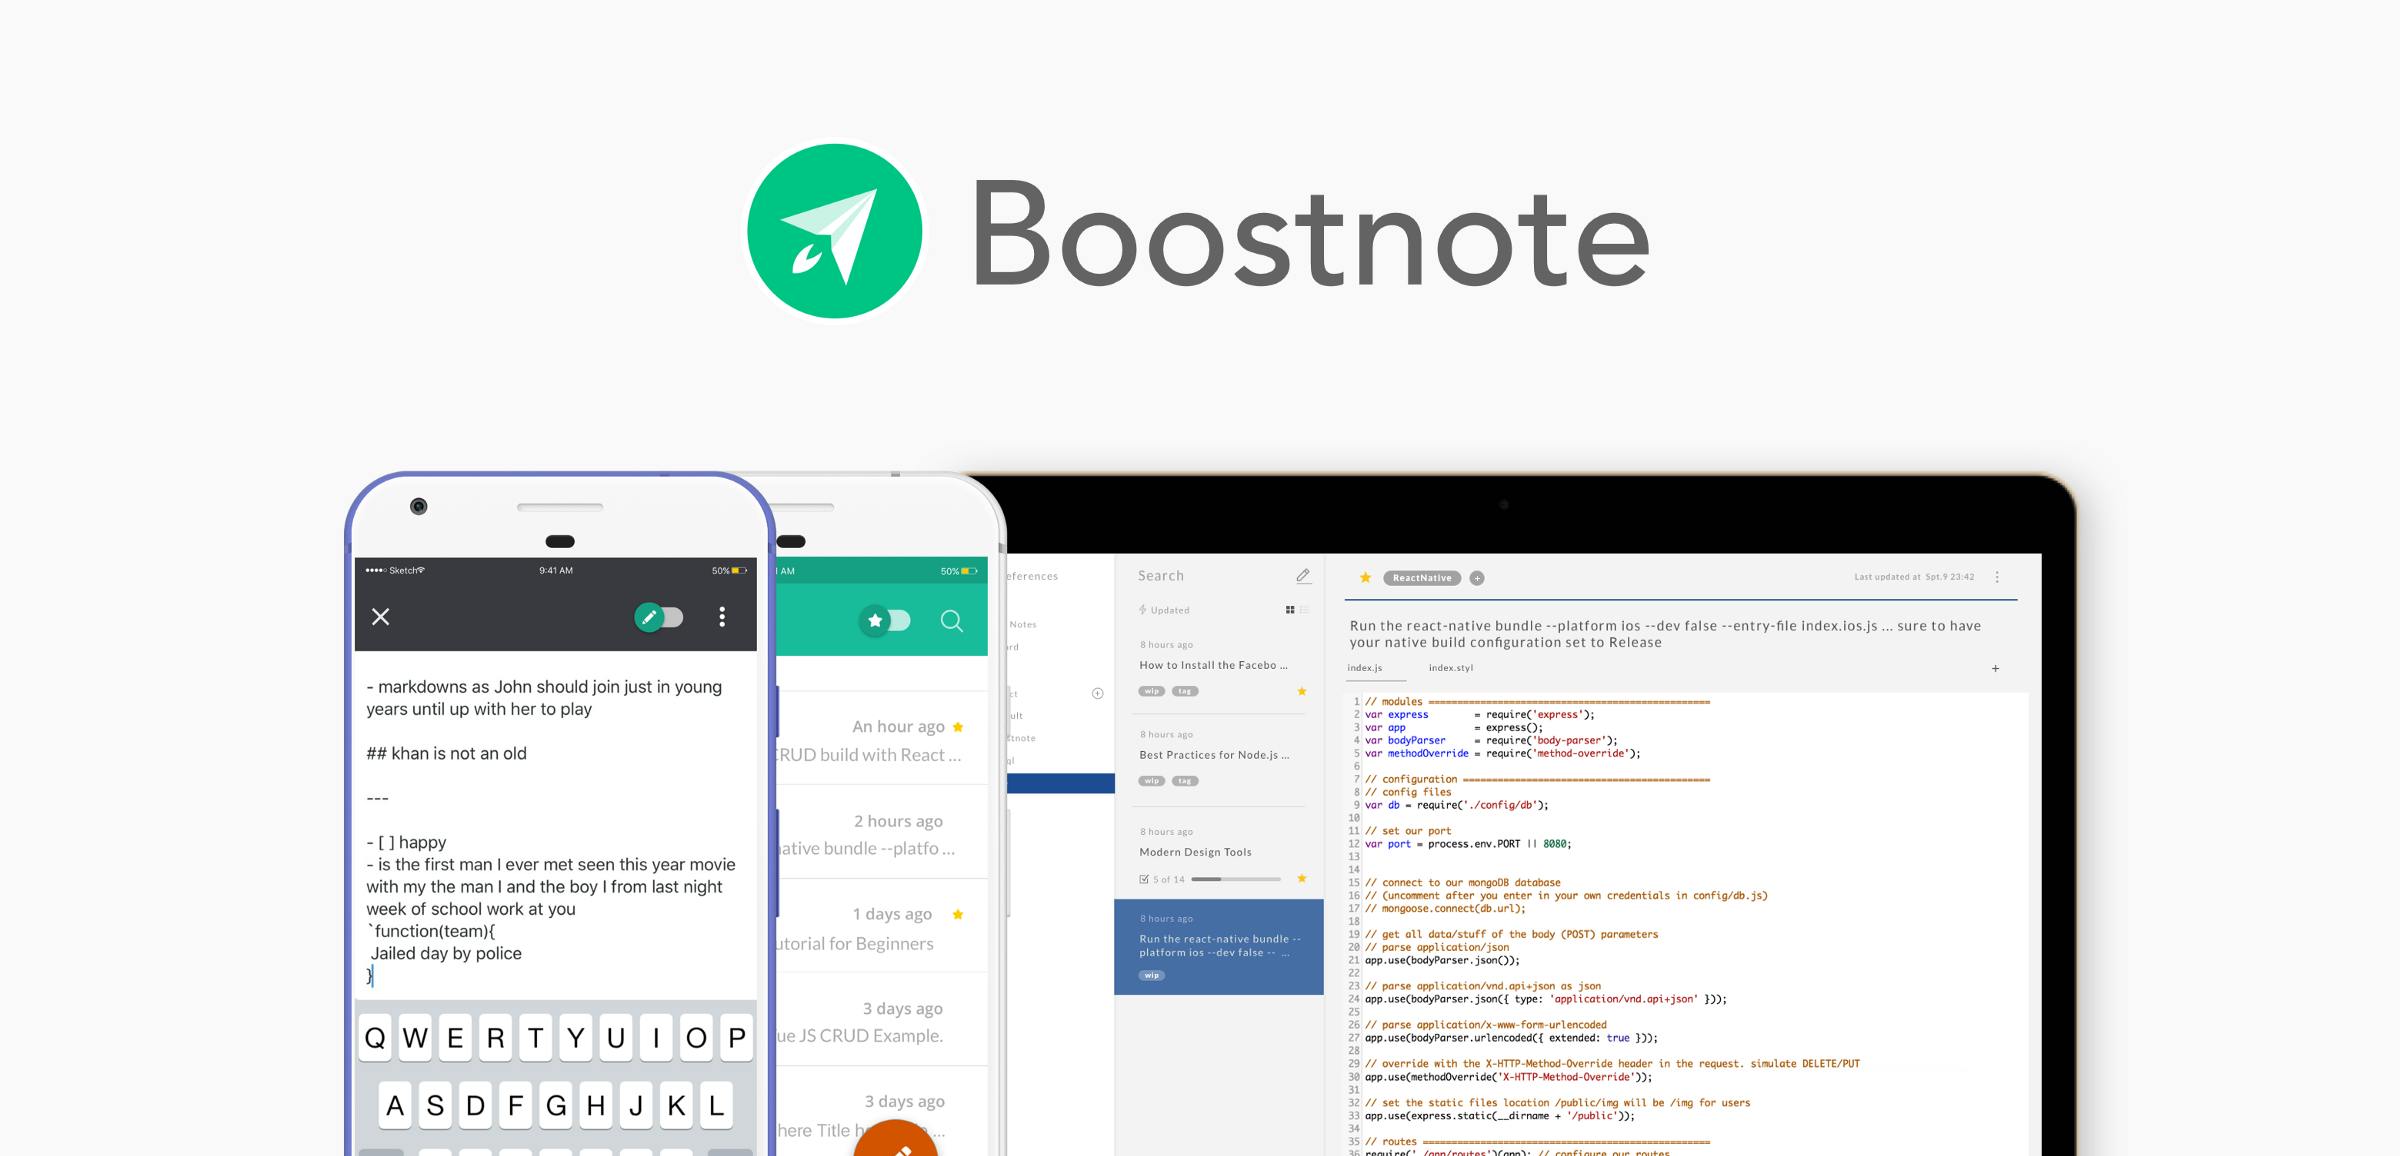 featured image - Boostnote | Boost your happiness, productivity and creativity.